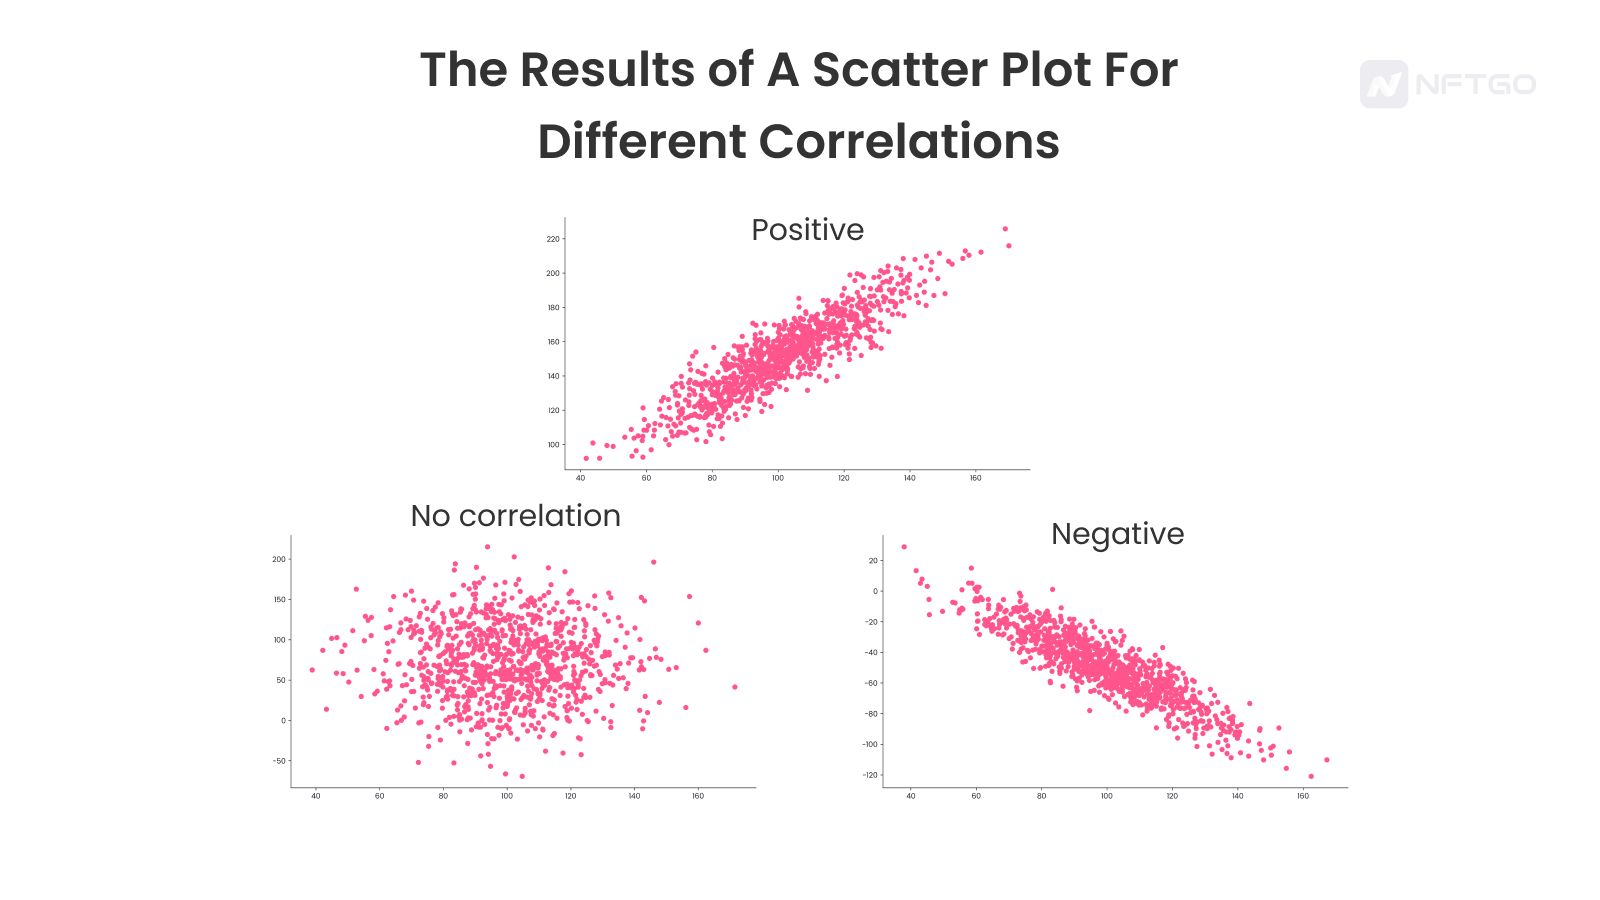 The Results of a Scatter Plot for Different Correlations 